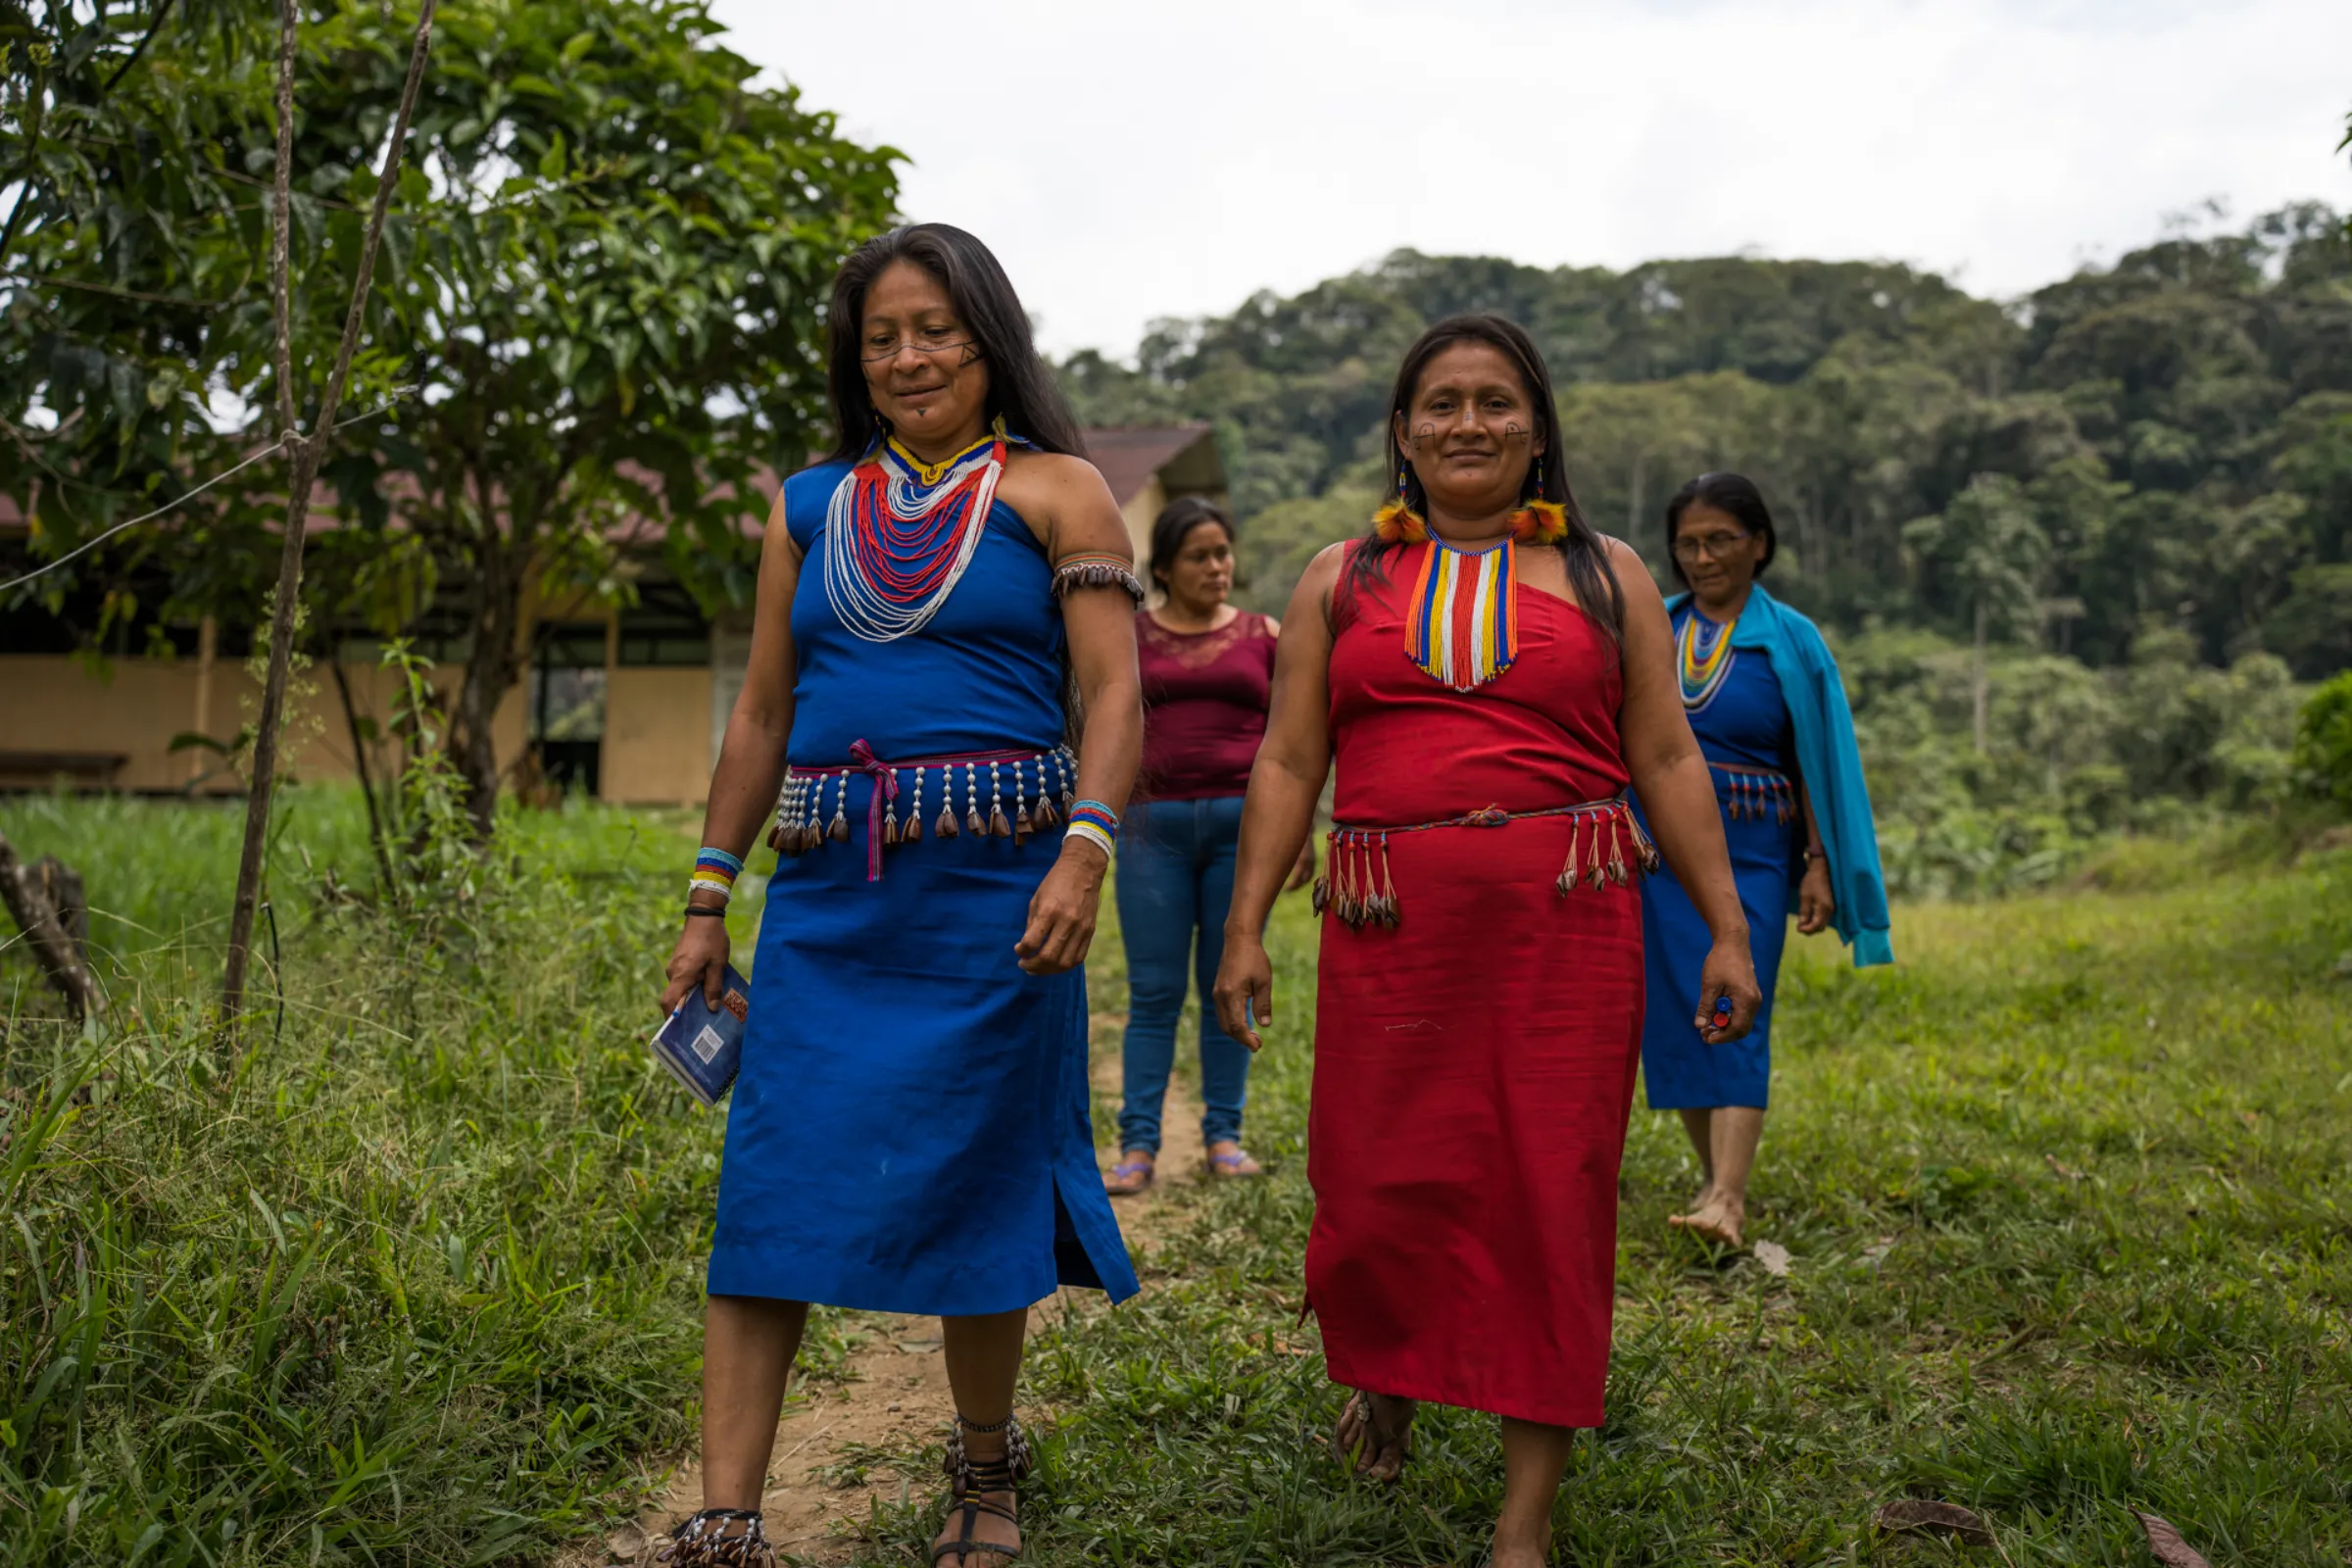 Dressed in traditional Shuar outfits, indigenous leaders Teresa Tupikia (left) and Margarita Jempekat (right), attend a special workshop about the mining threats in their communities